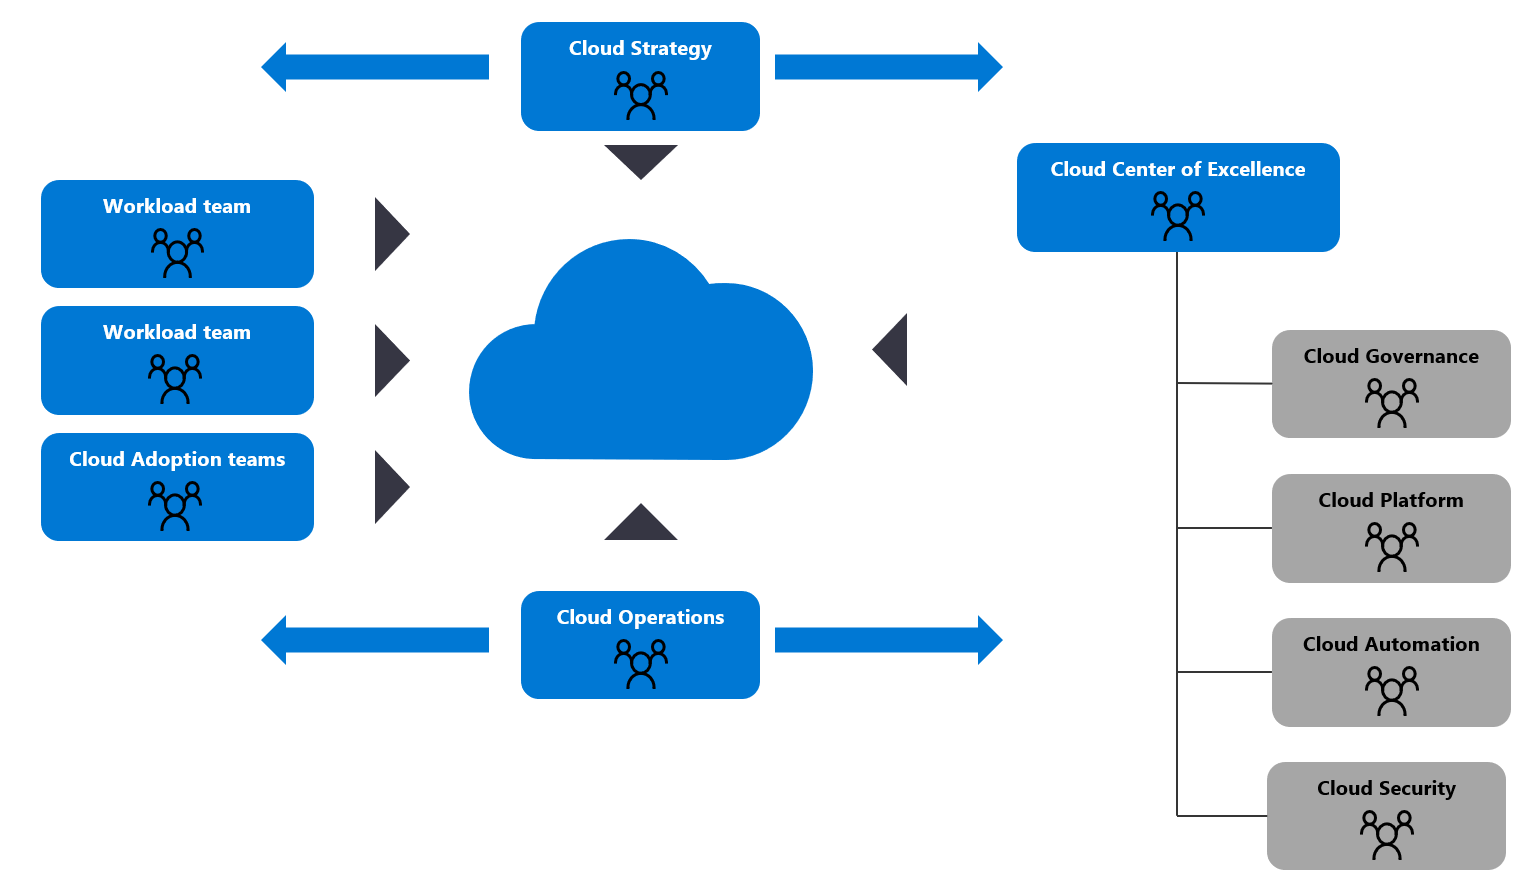 Diagram that shows the cloud center of excellence (C C o E).